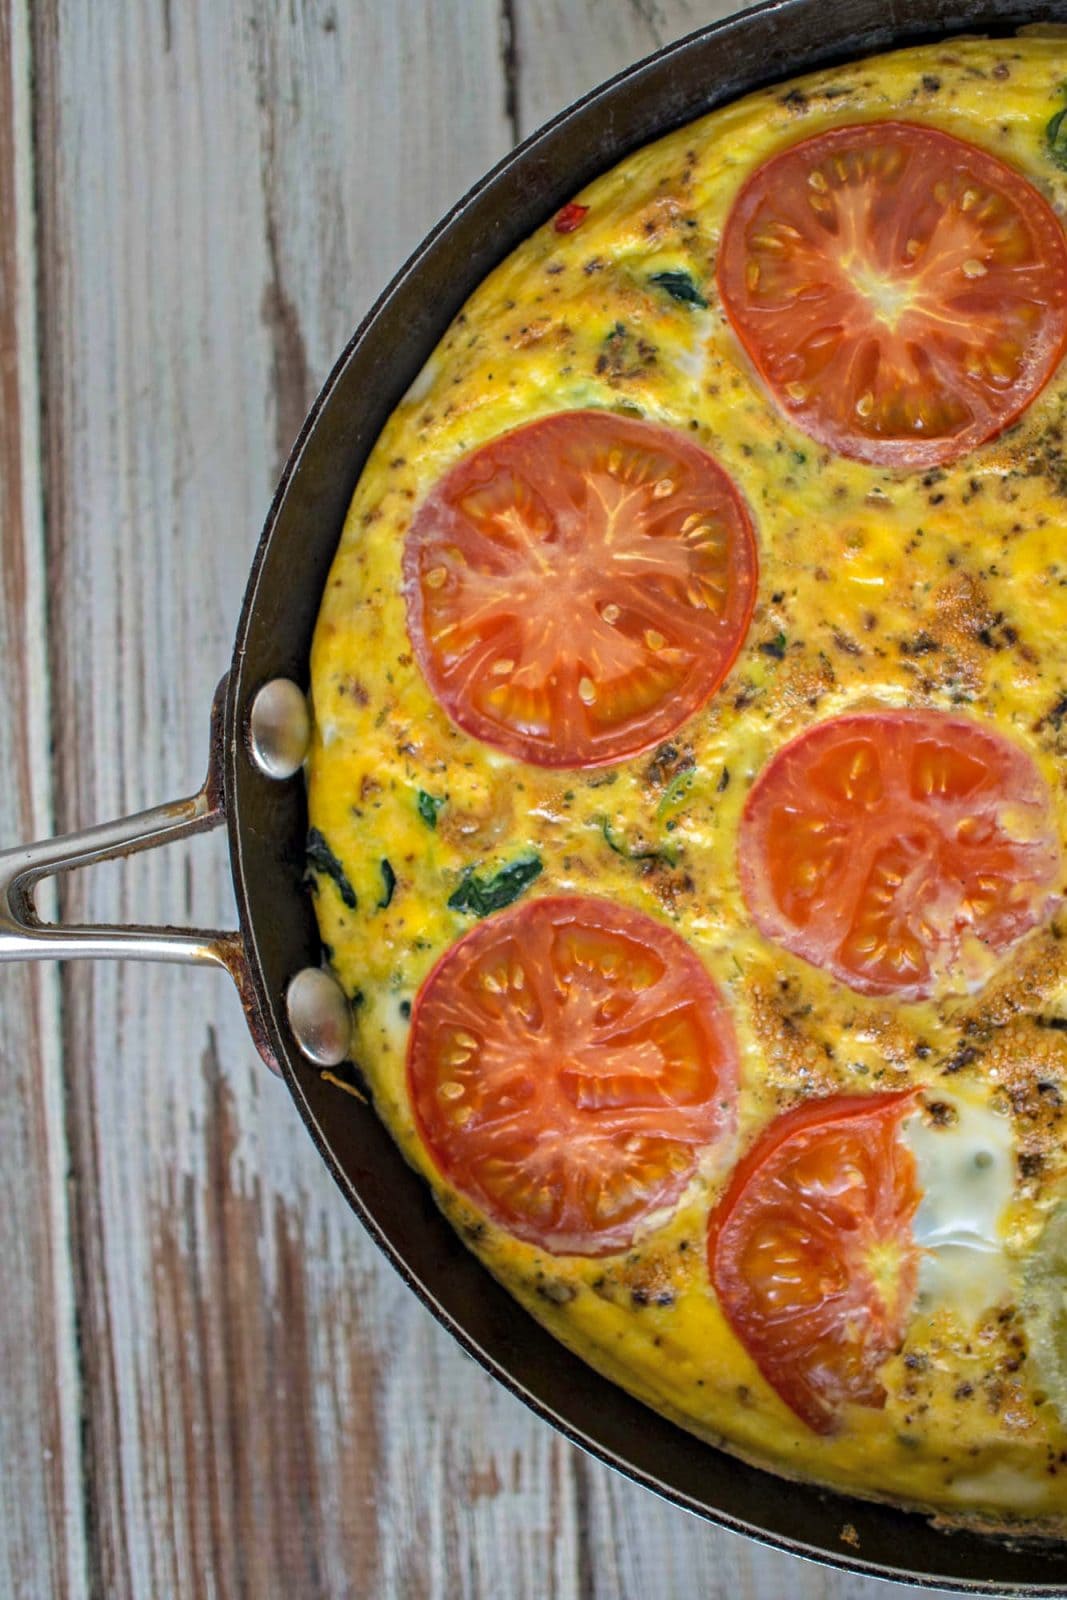 Breakfast frittata recipe using spinach and tomatoes